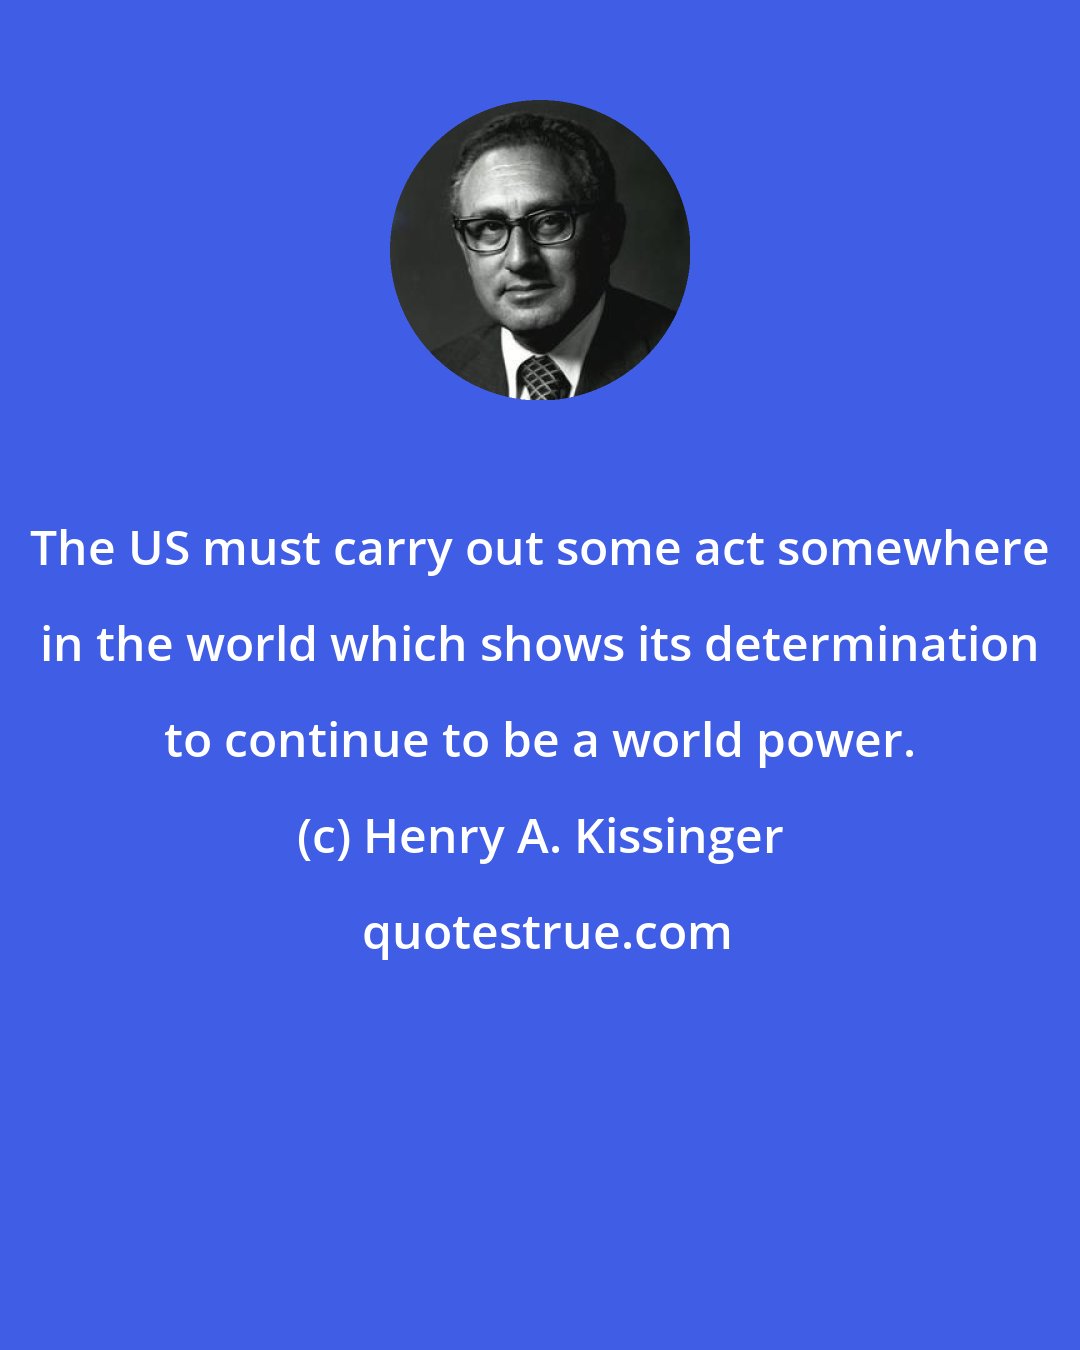 Henry A. Kissinger: The US must carry out some act somewhere in the world which shows its determination to continue to be a world power.